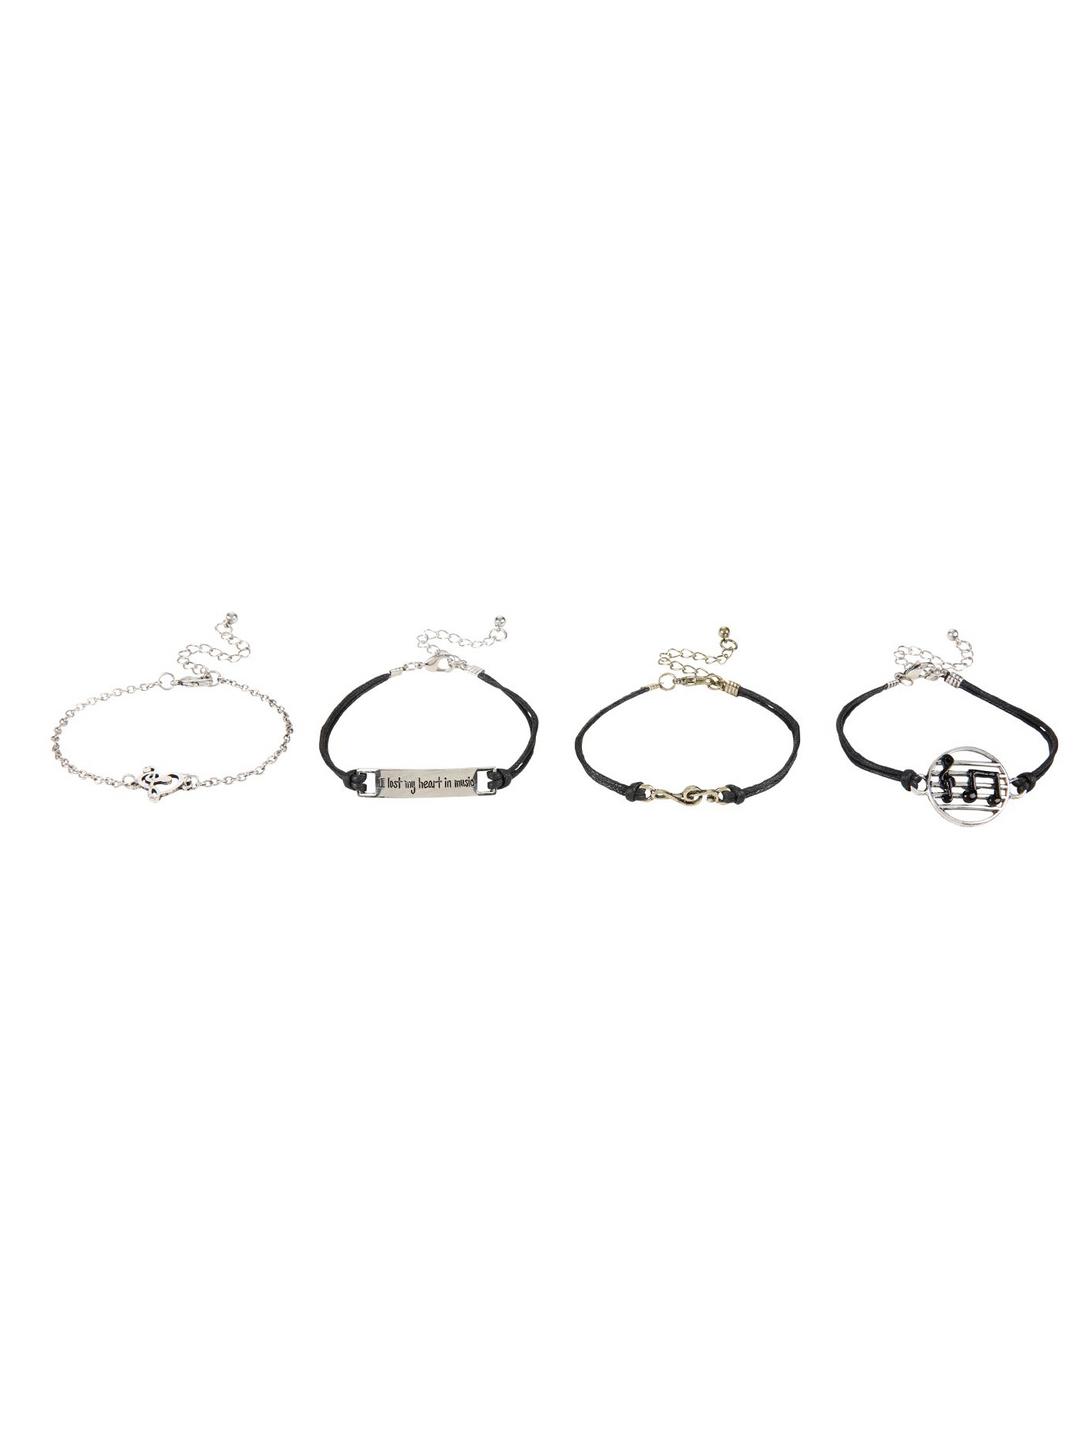 Music Notes Cord & Chain Bracelet 4 Pack, , hi-res